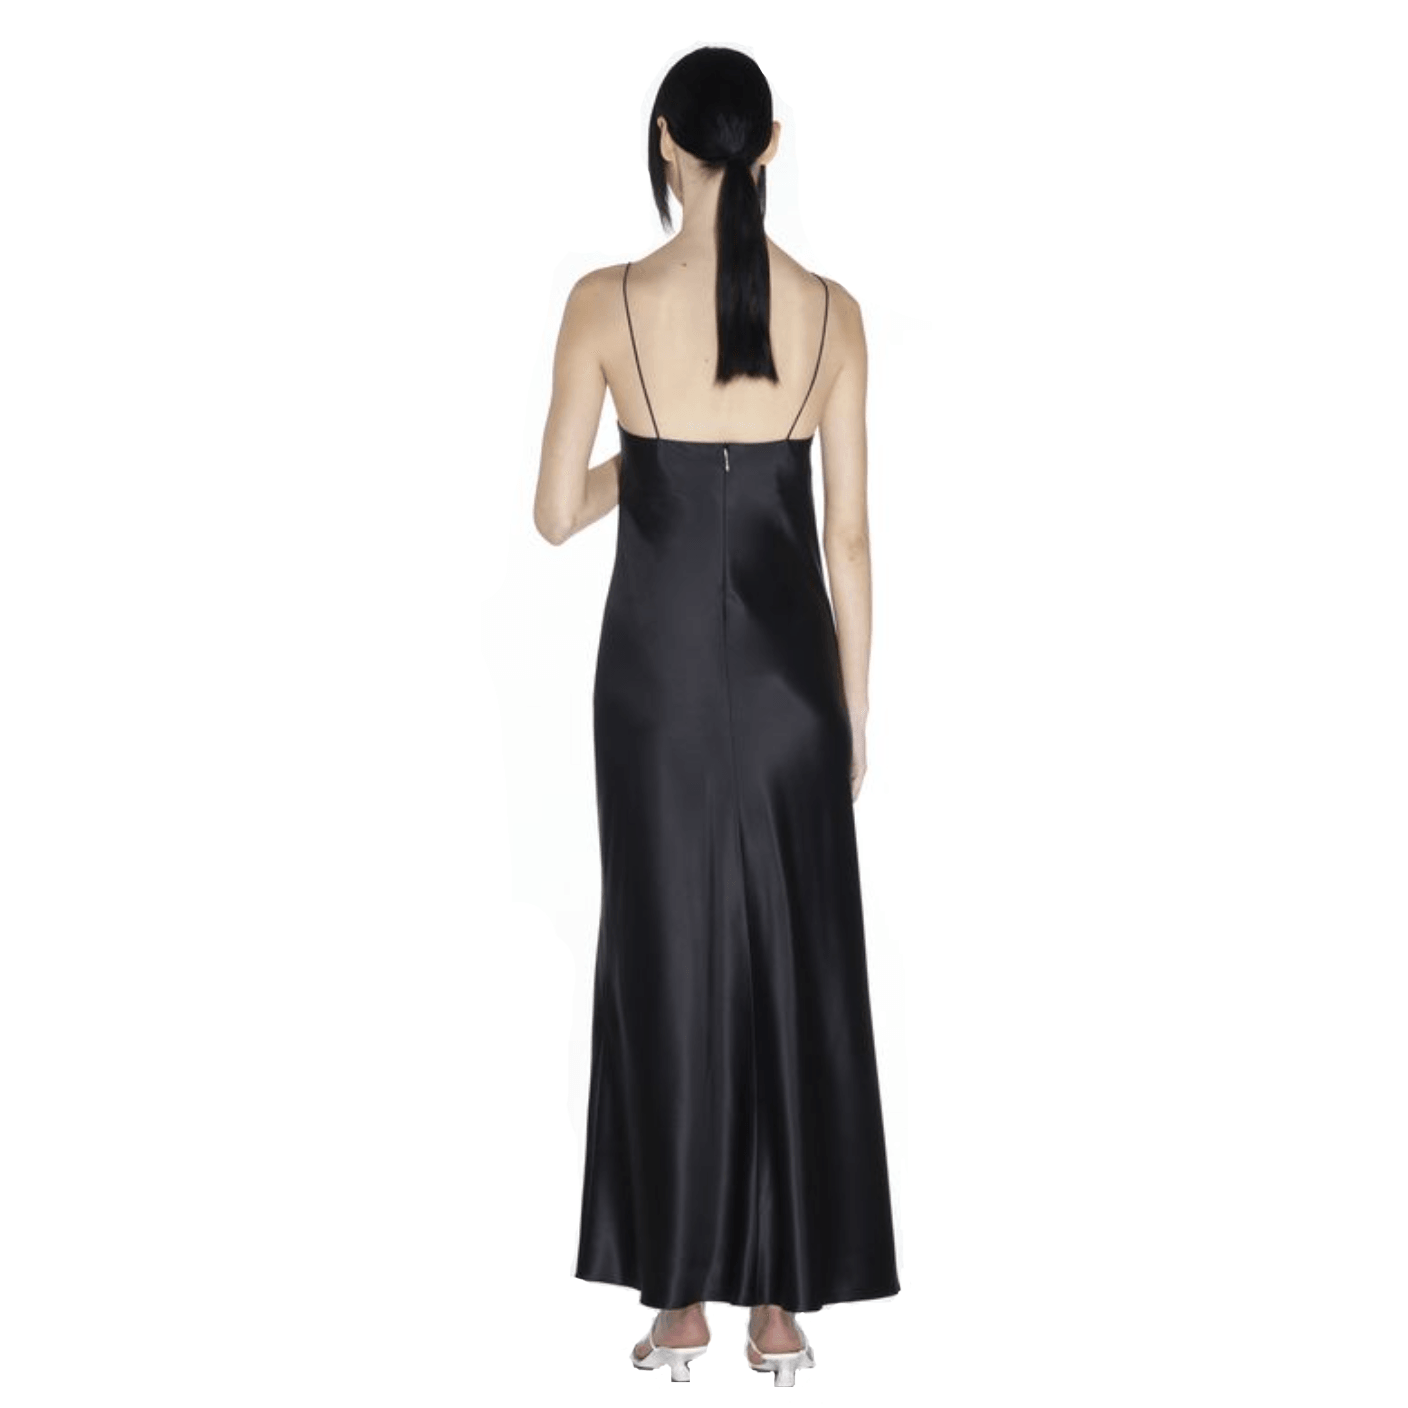 Incognito Crystal Embellished Maxi Dress